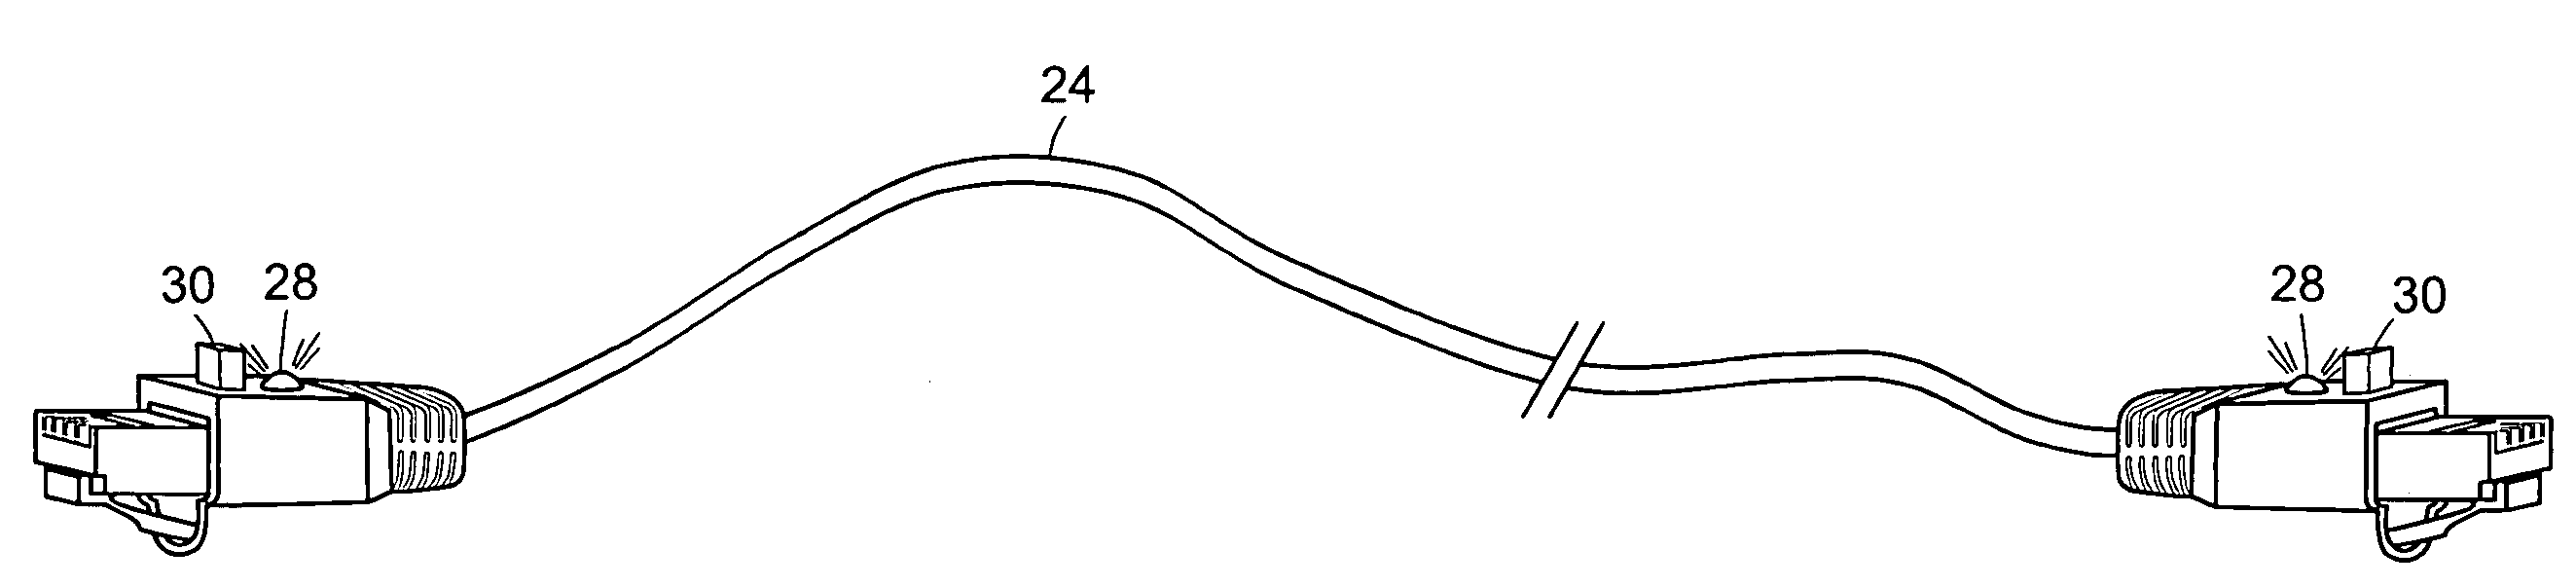 Self-identifying cable for interconnecting electronic devices